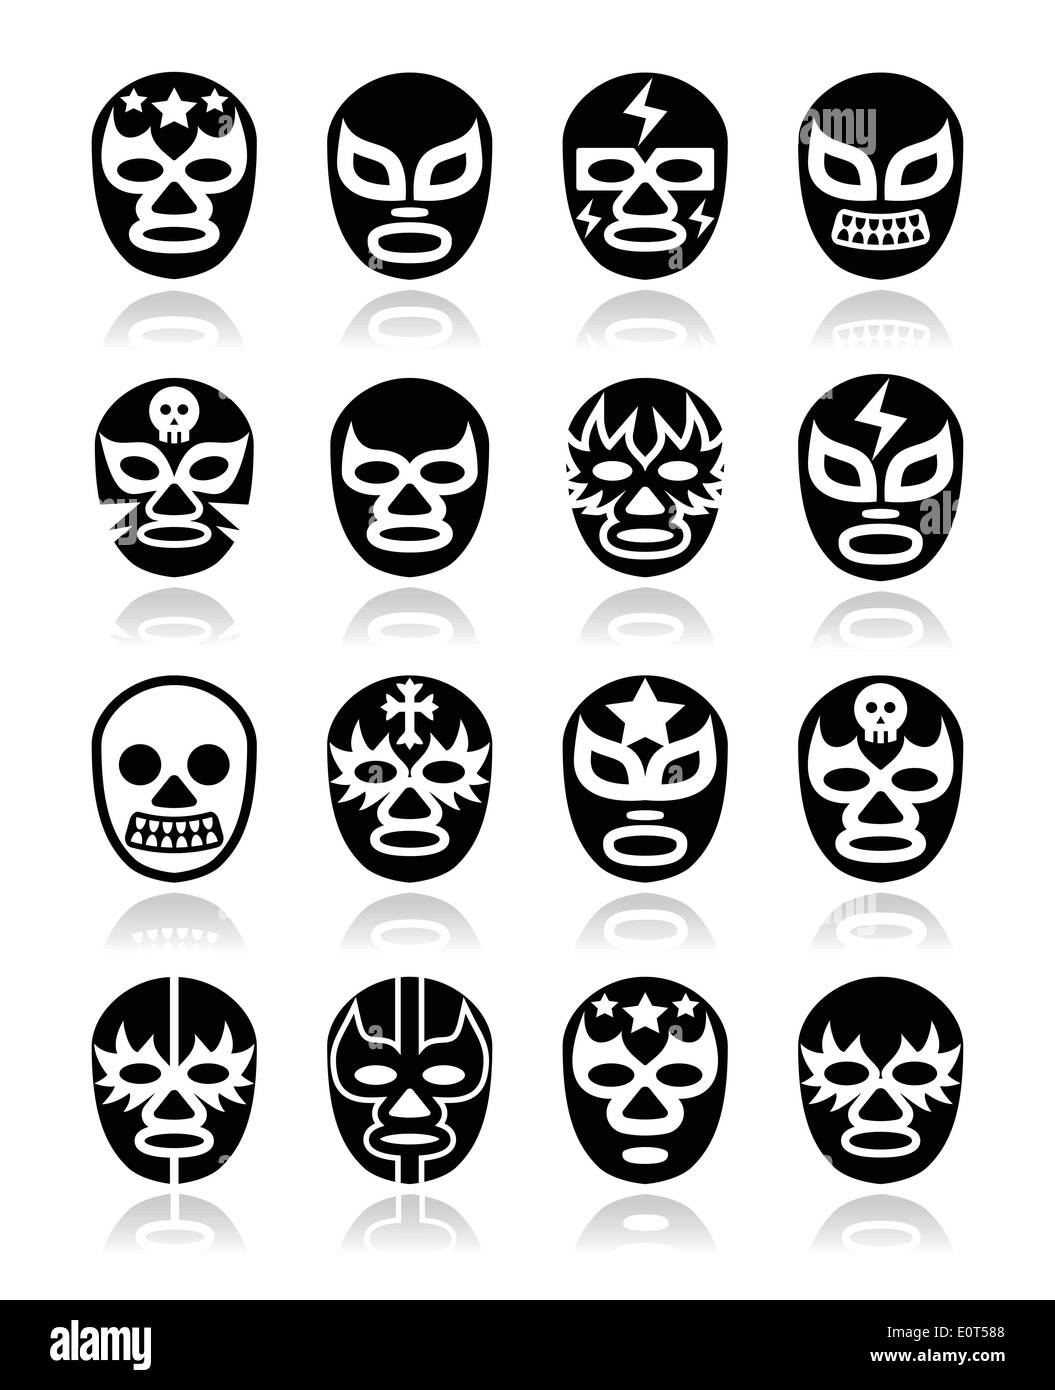 Lucha libre mexican wrestling masks icons Stock Vector